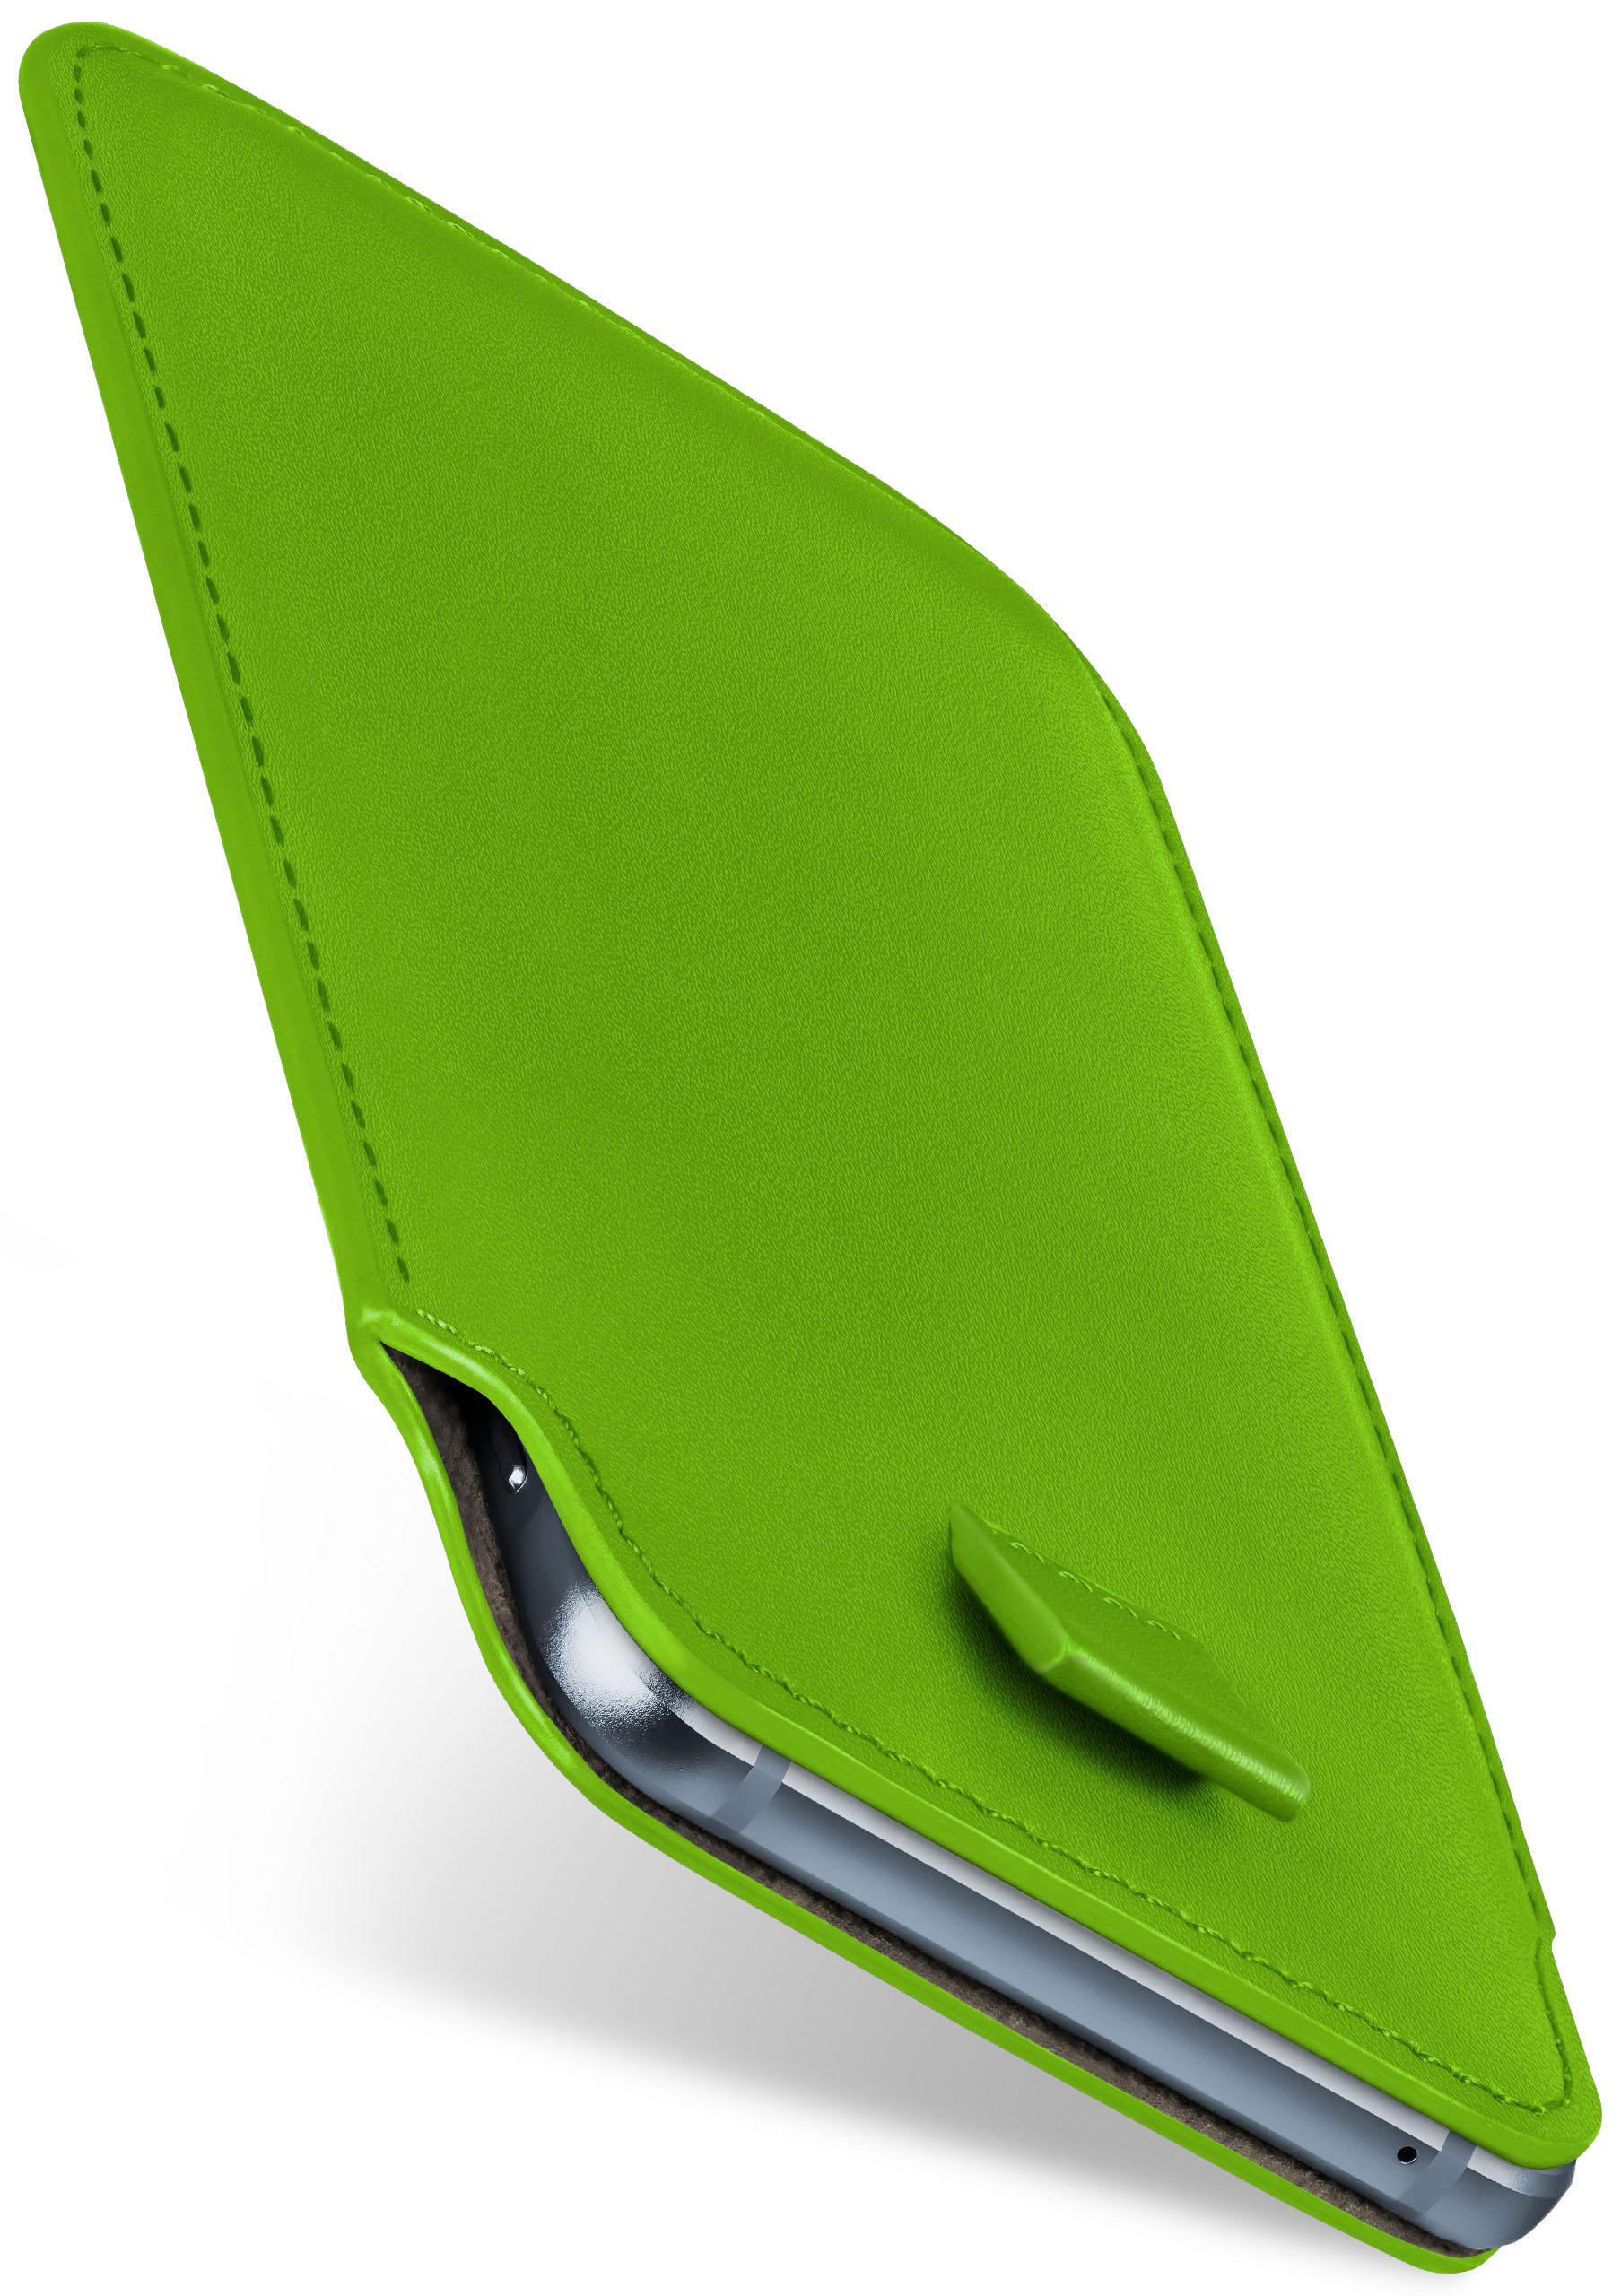 MOEX Slide Case, Full Cover, Sony, Lime-Green Xperia Compact, XZ2